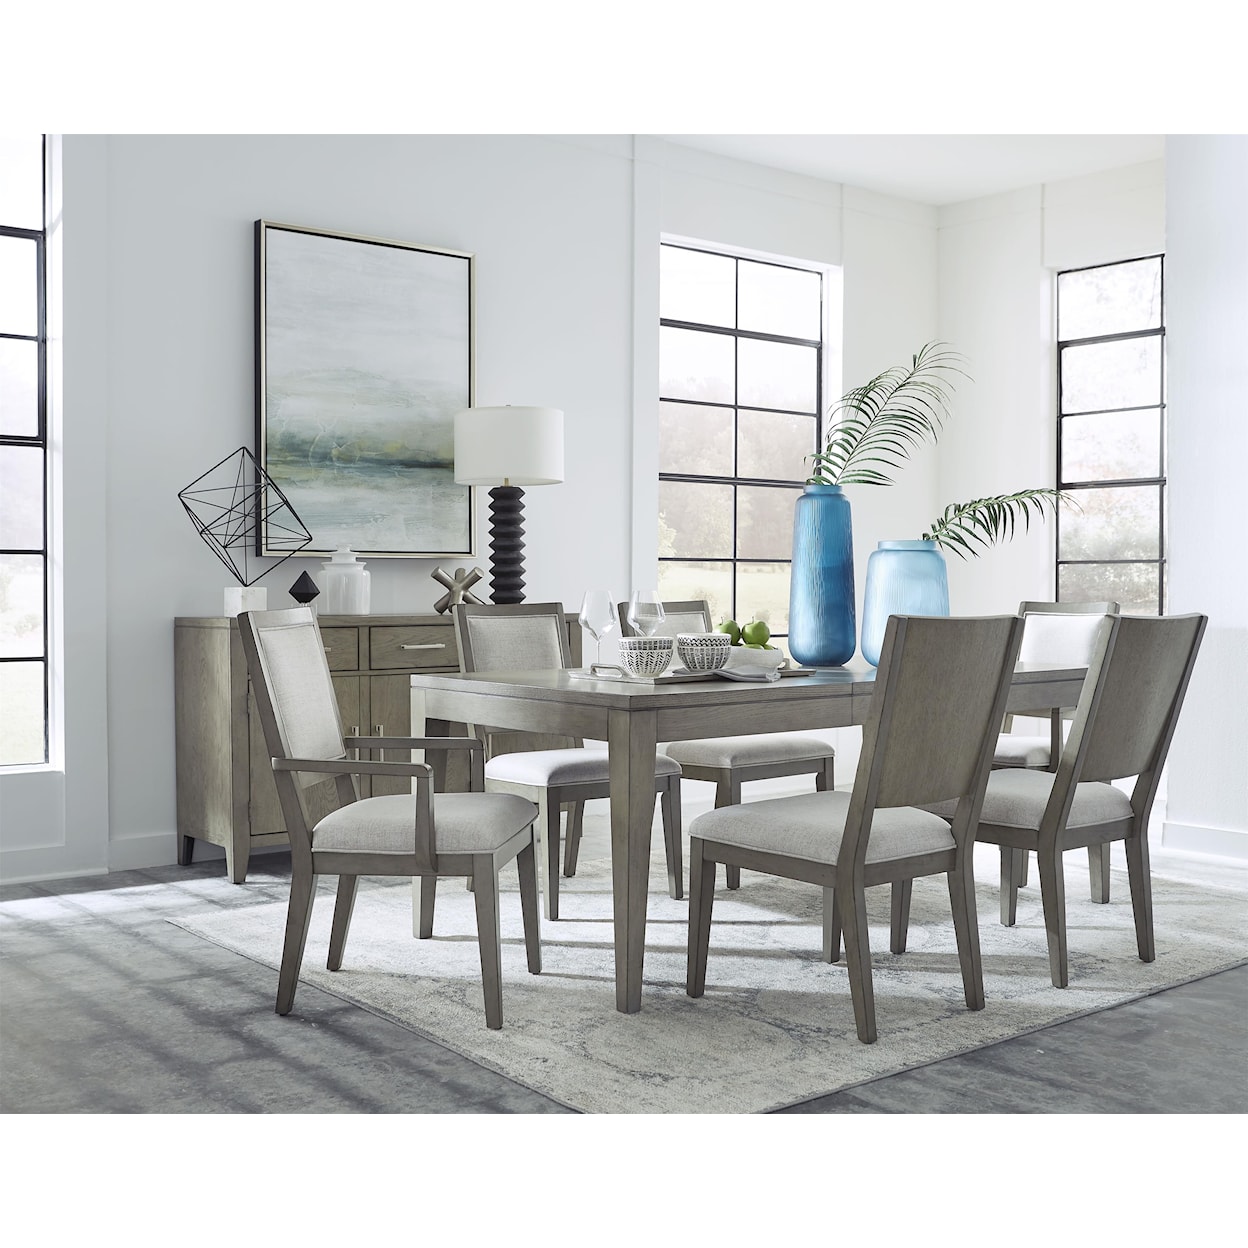 Samuel Lawrence Essex by Drew and Jonathan Home Essex 5-Piece Dining Set